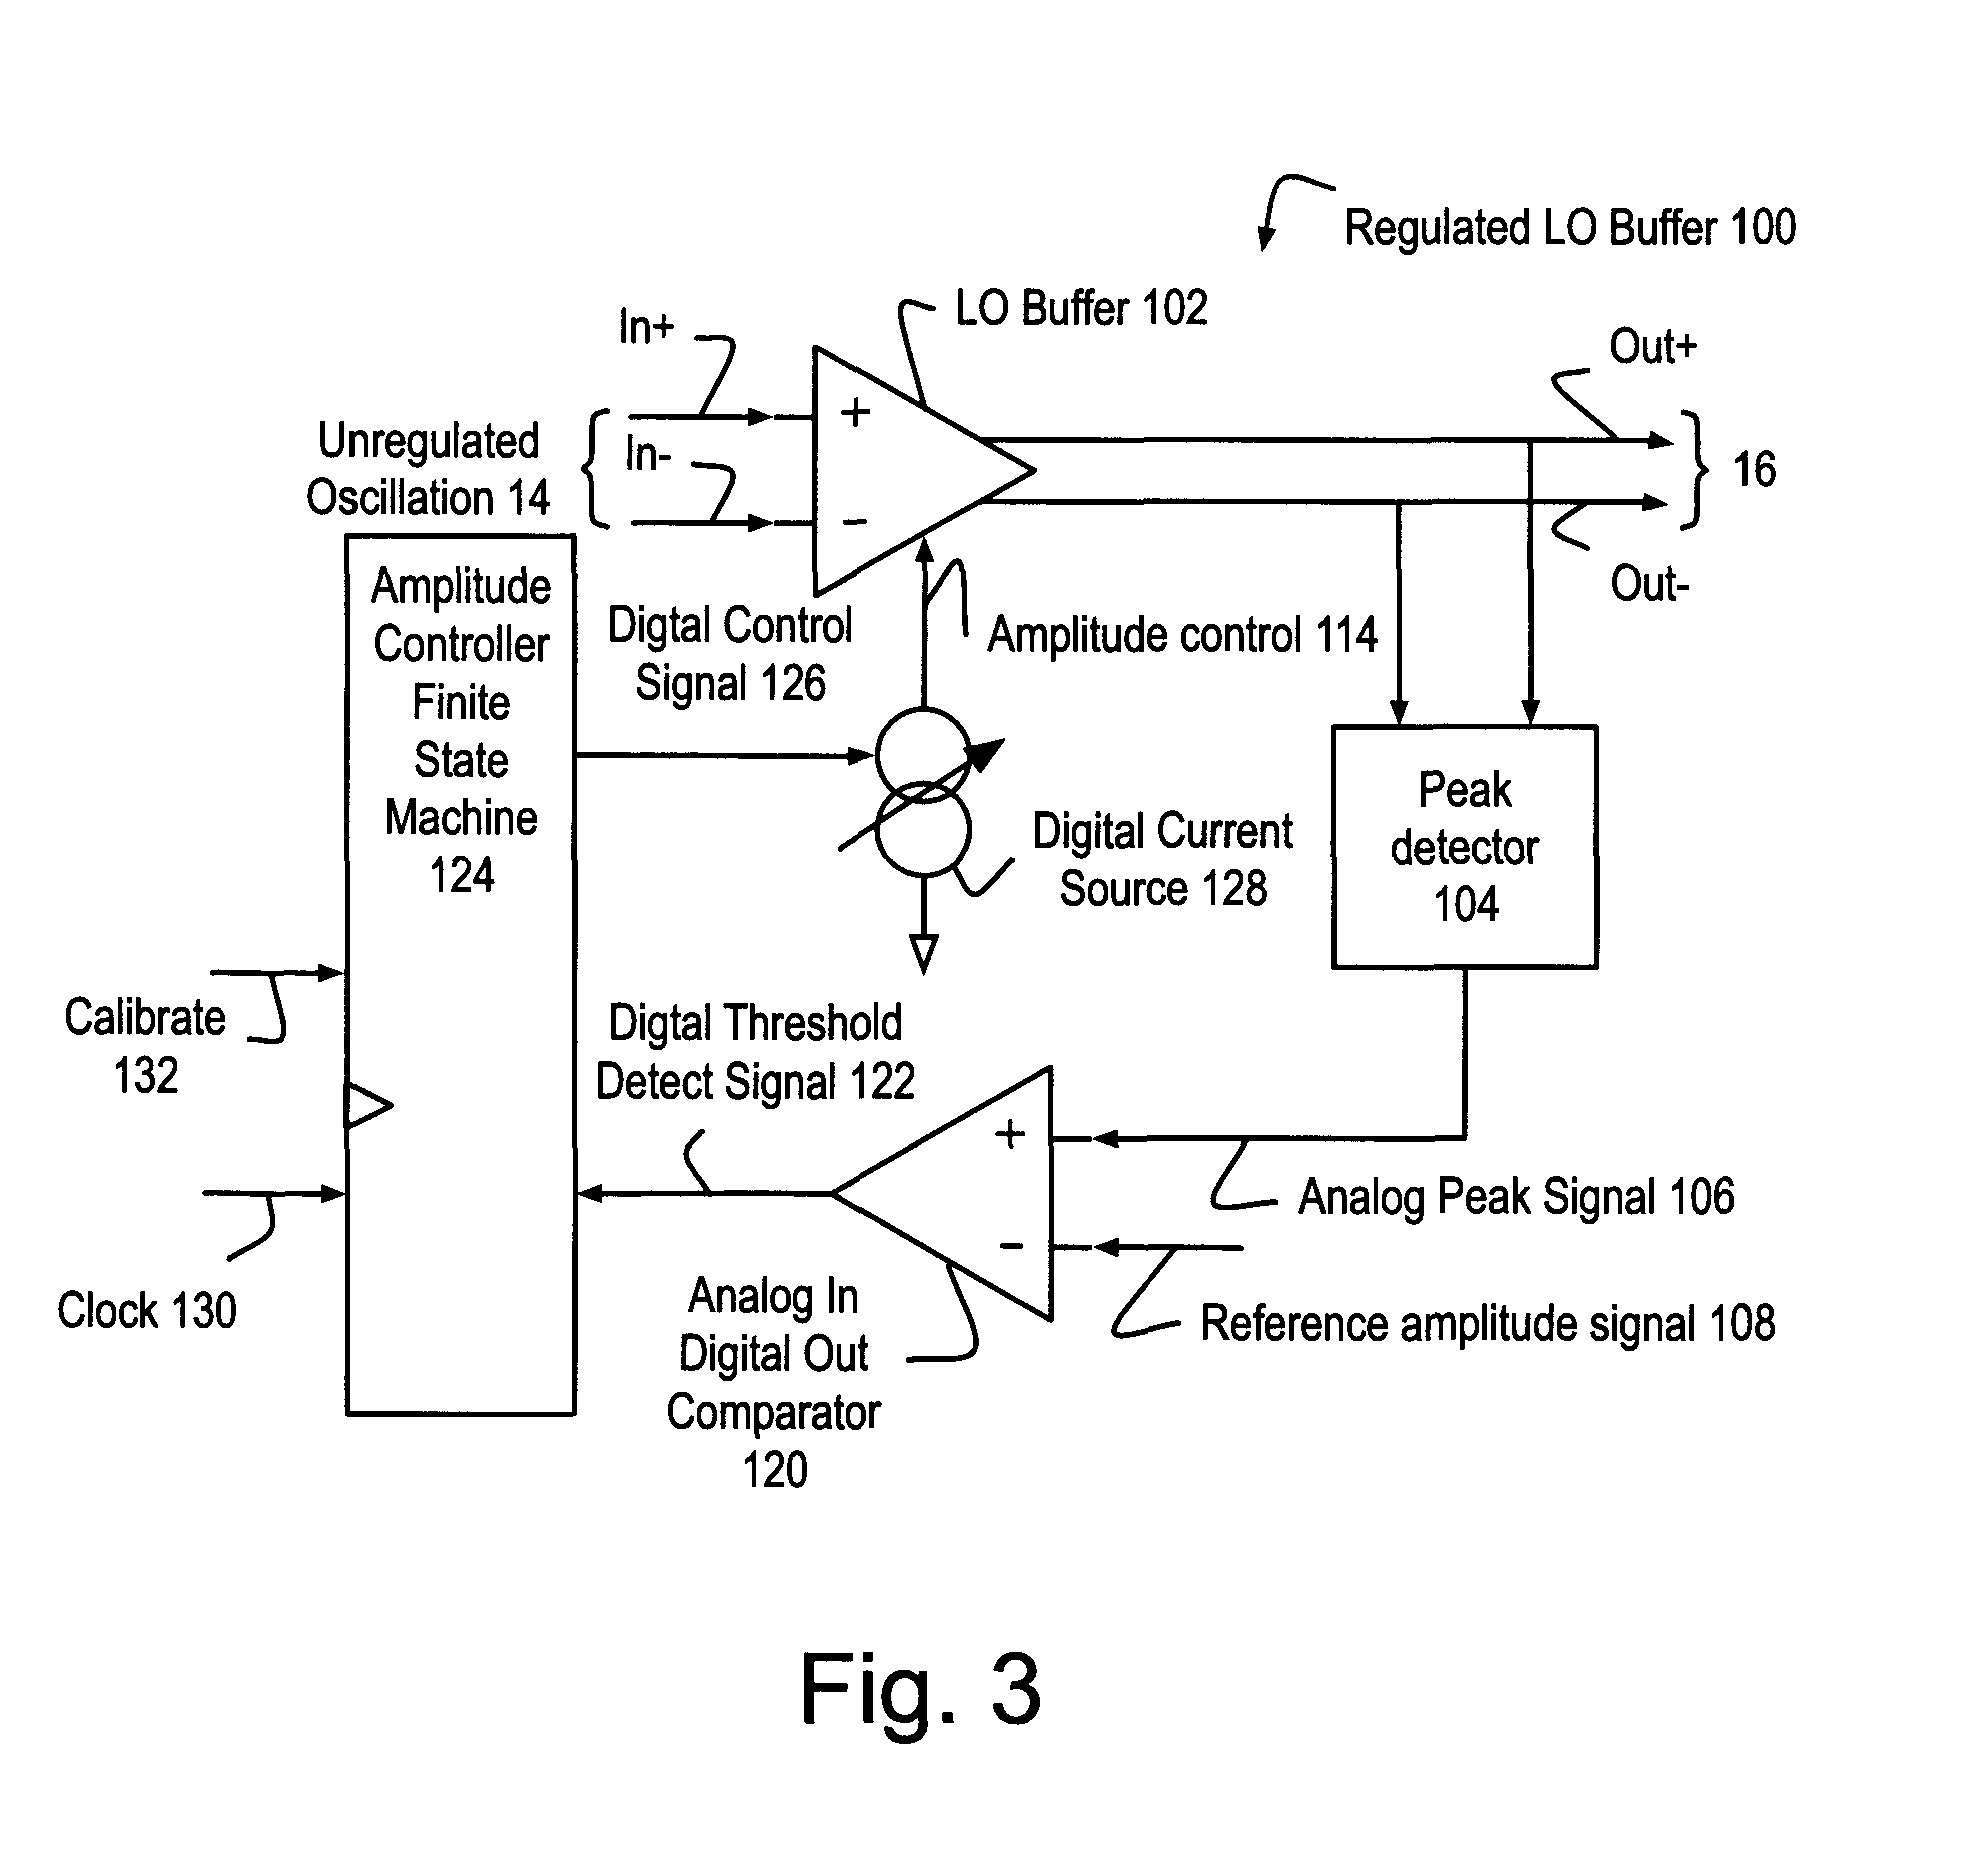 Method and apparatus for a digital regulated local oscillation (LO) buffer in radio frequency circuits